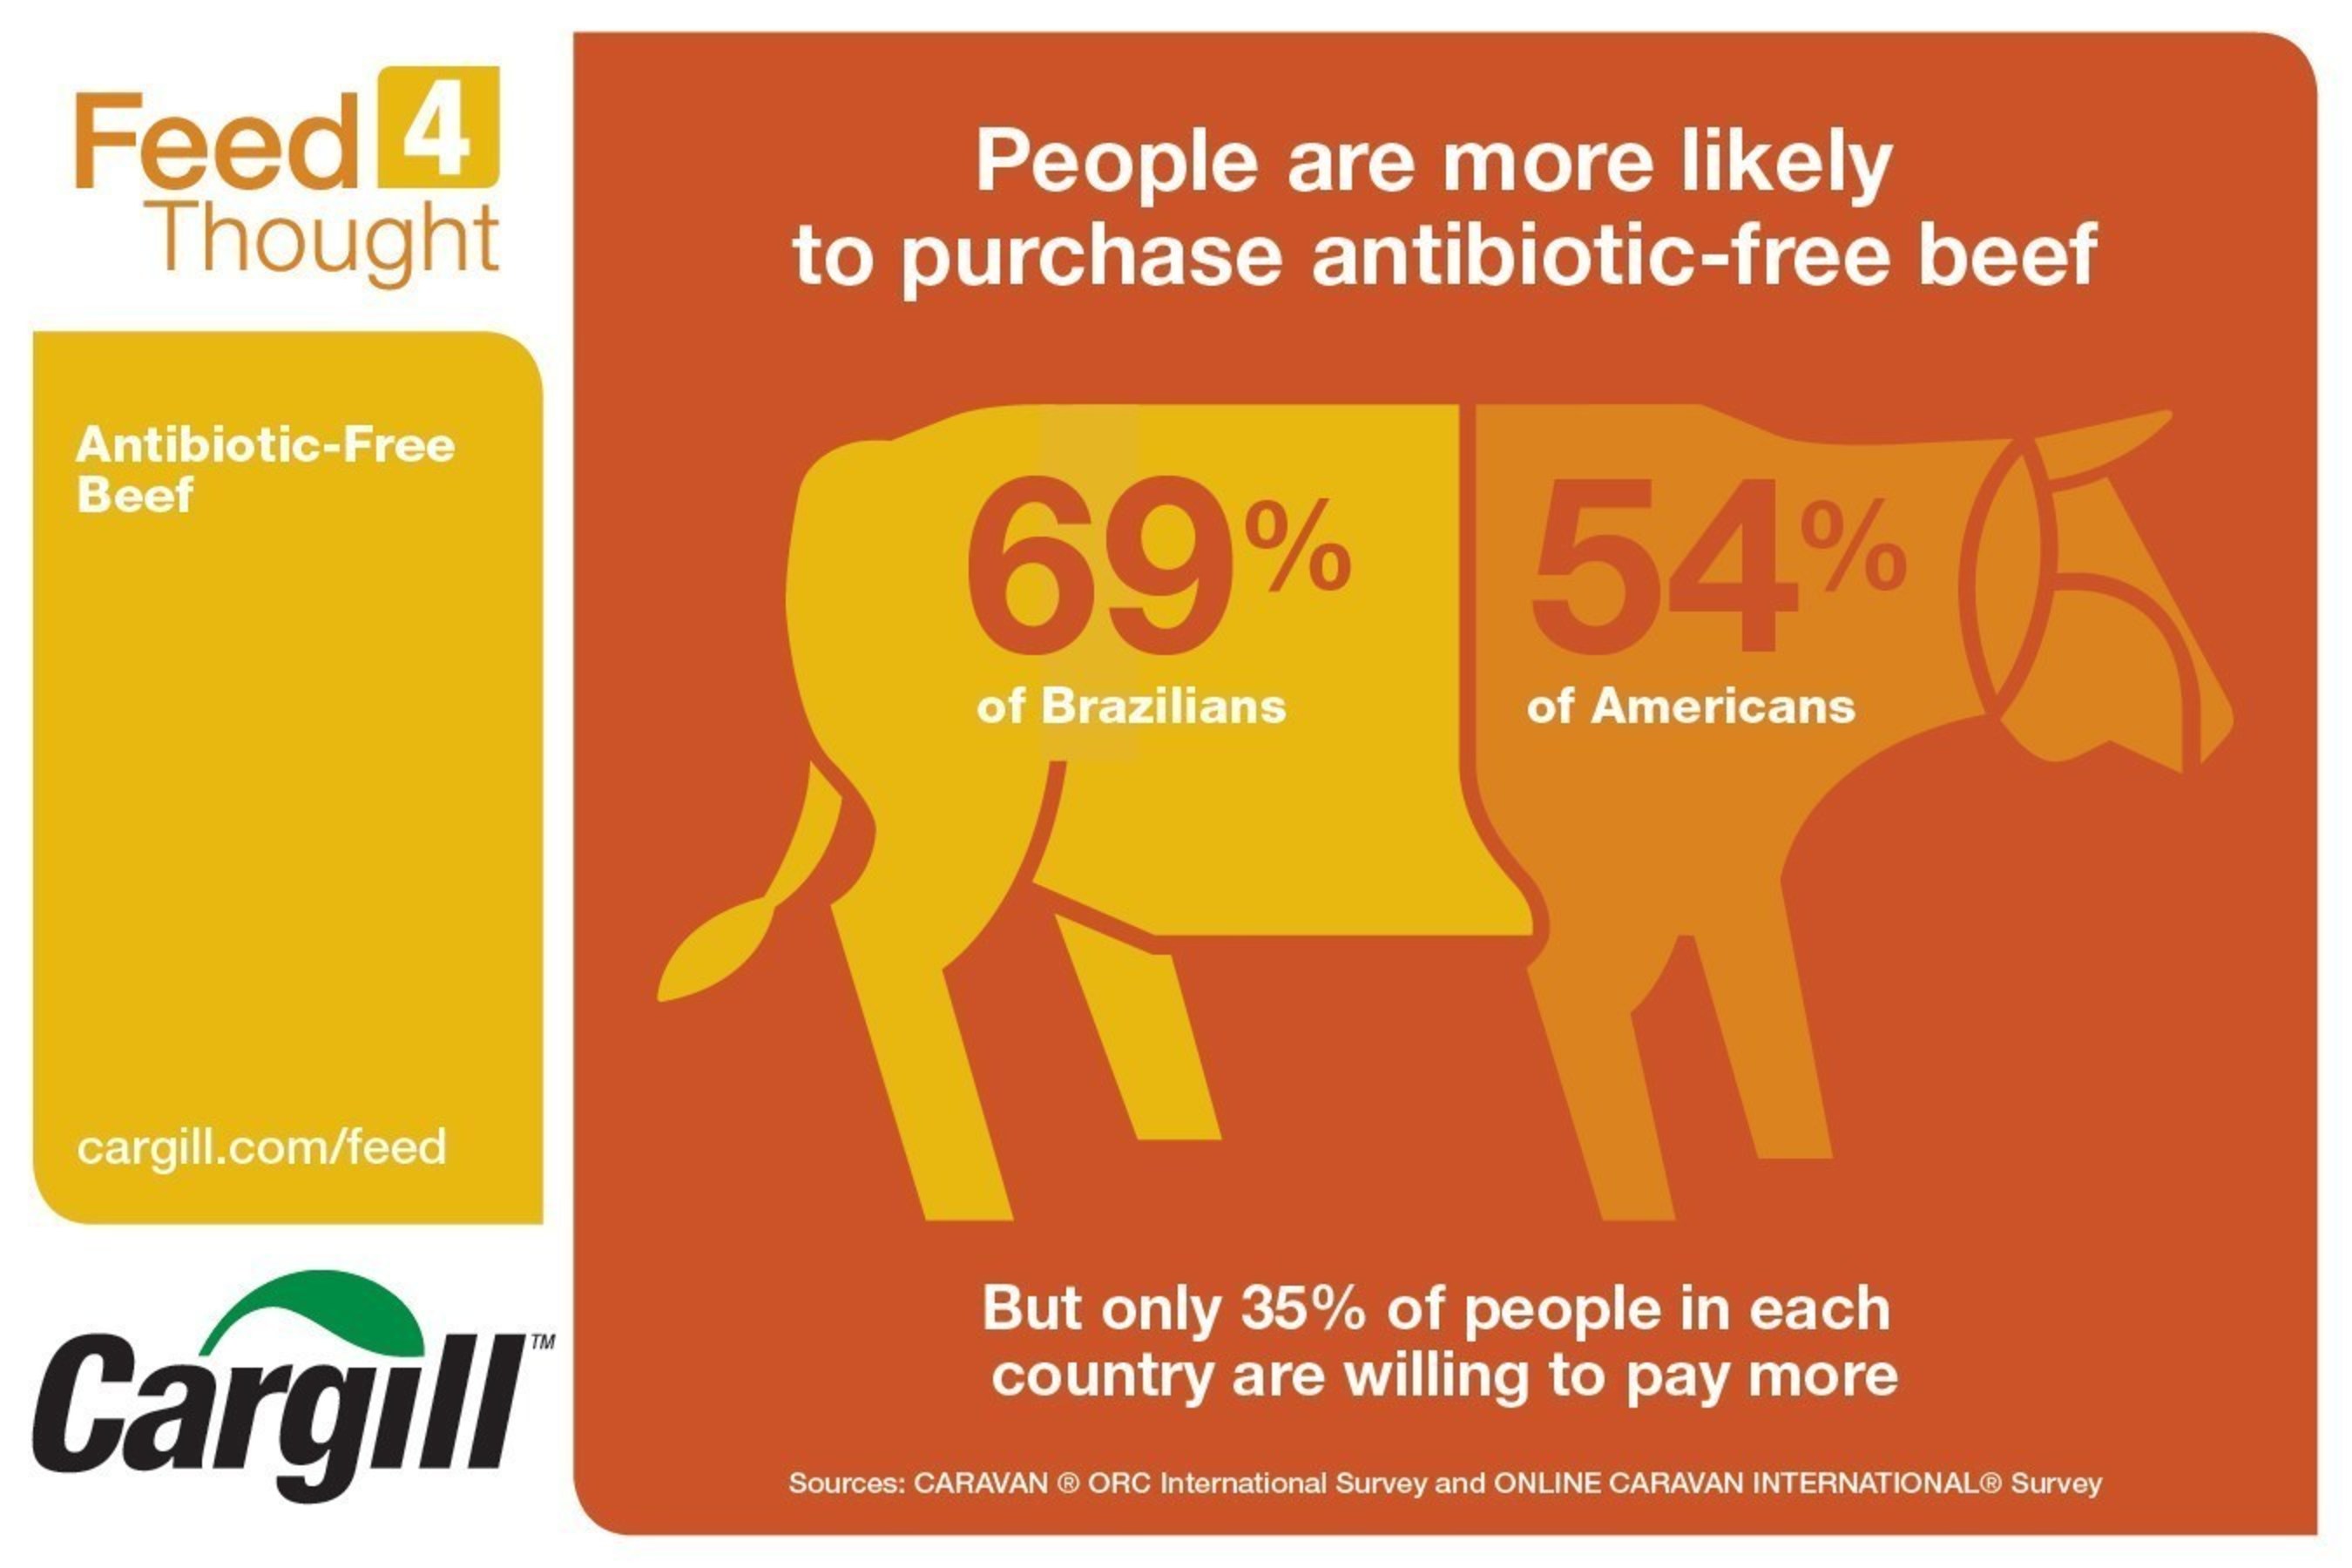 People are more likely to purchase antibiotic-free beef